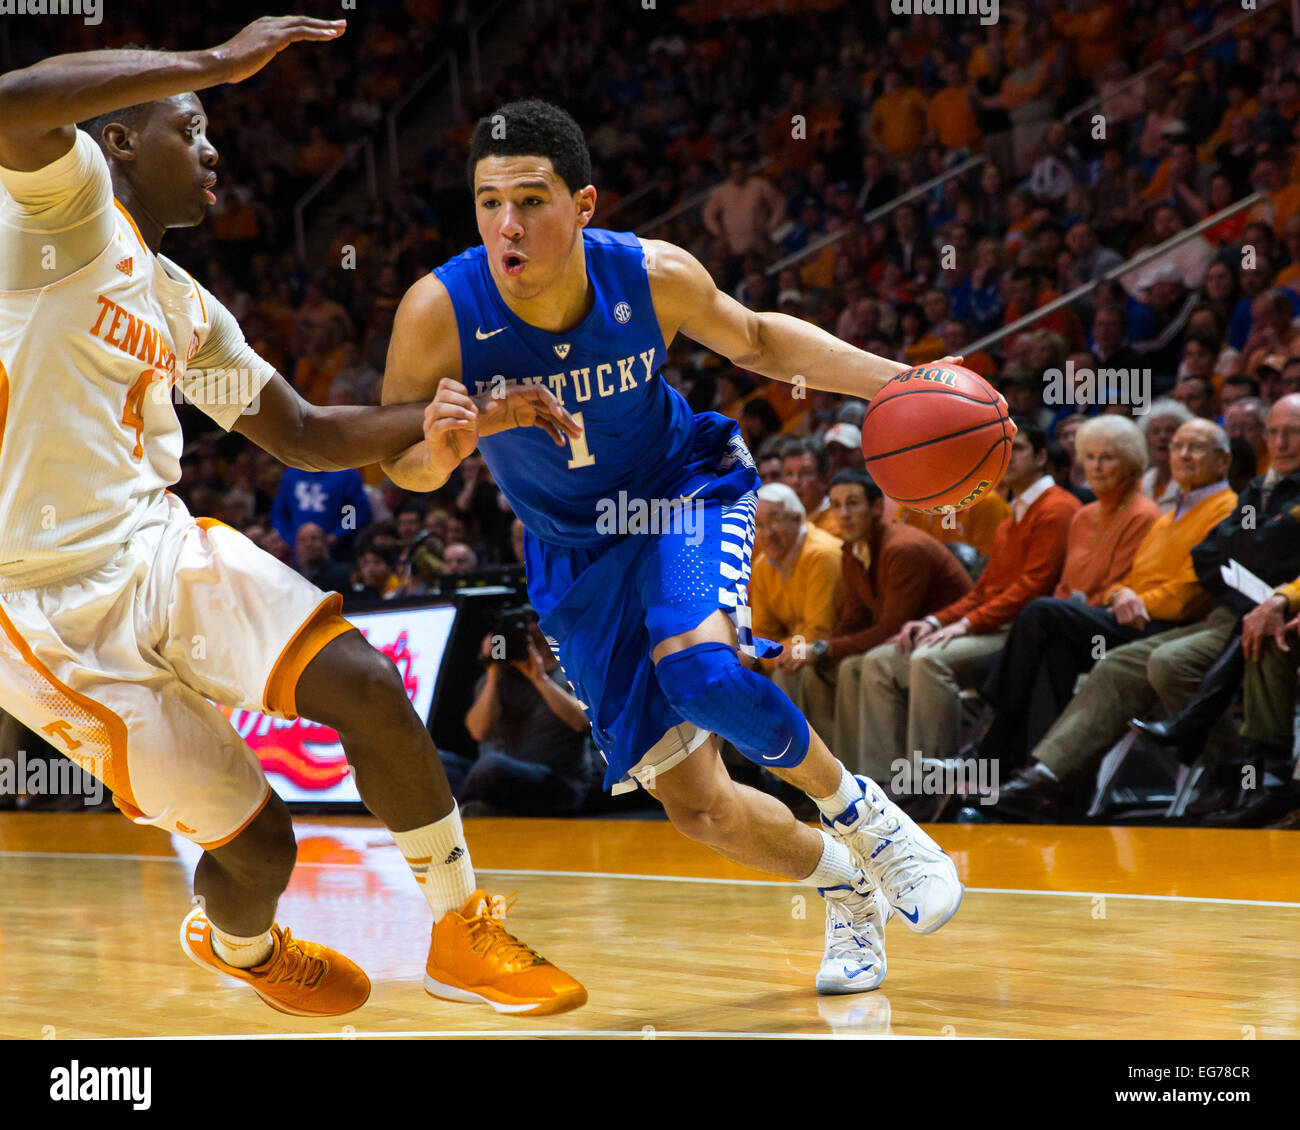 February 17, 2015: Devin Booker #1 of the Kentucky Wildcats drives to the basket against Armani Moore #4 of the Tennessee Volunteers during the NCAA basketball game between the University of Tennessee Volunteers and the University of Kentucky Wildcats at Thompson Boling Arena in Knoxville TN Stock Photo